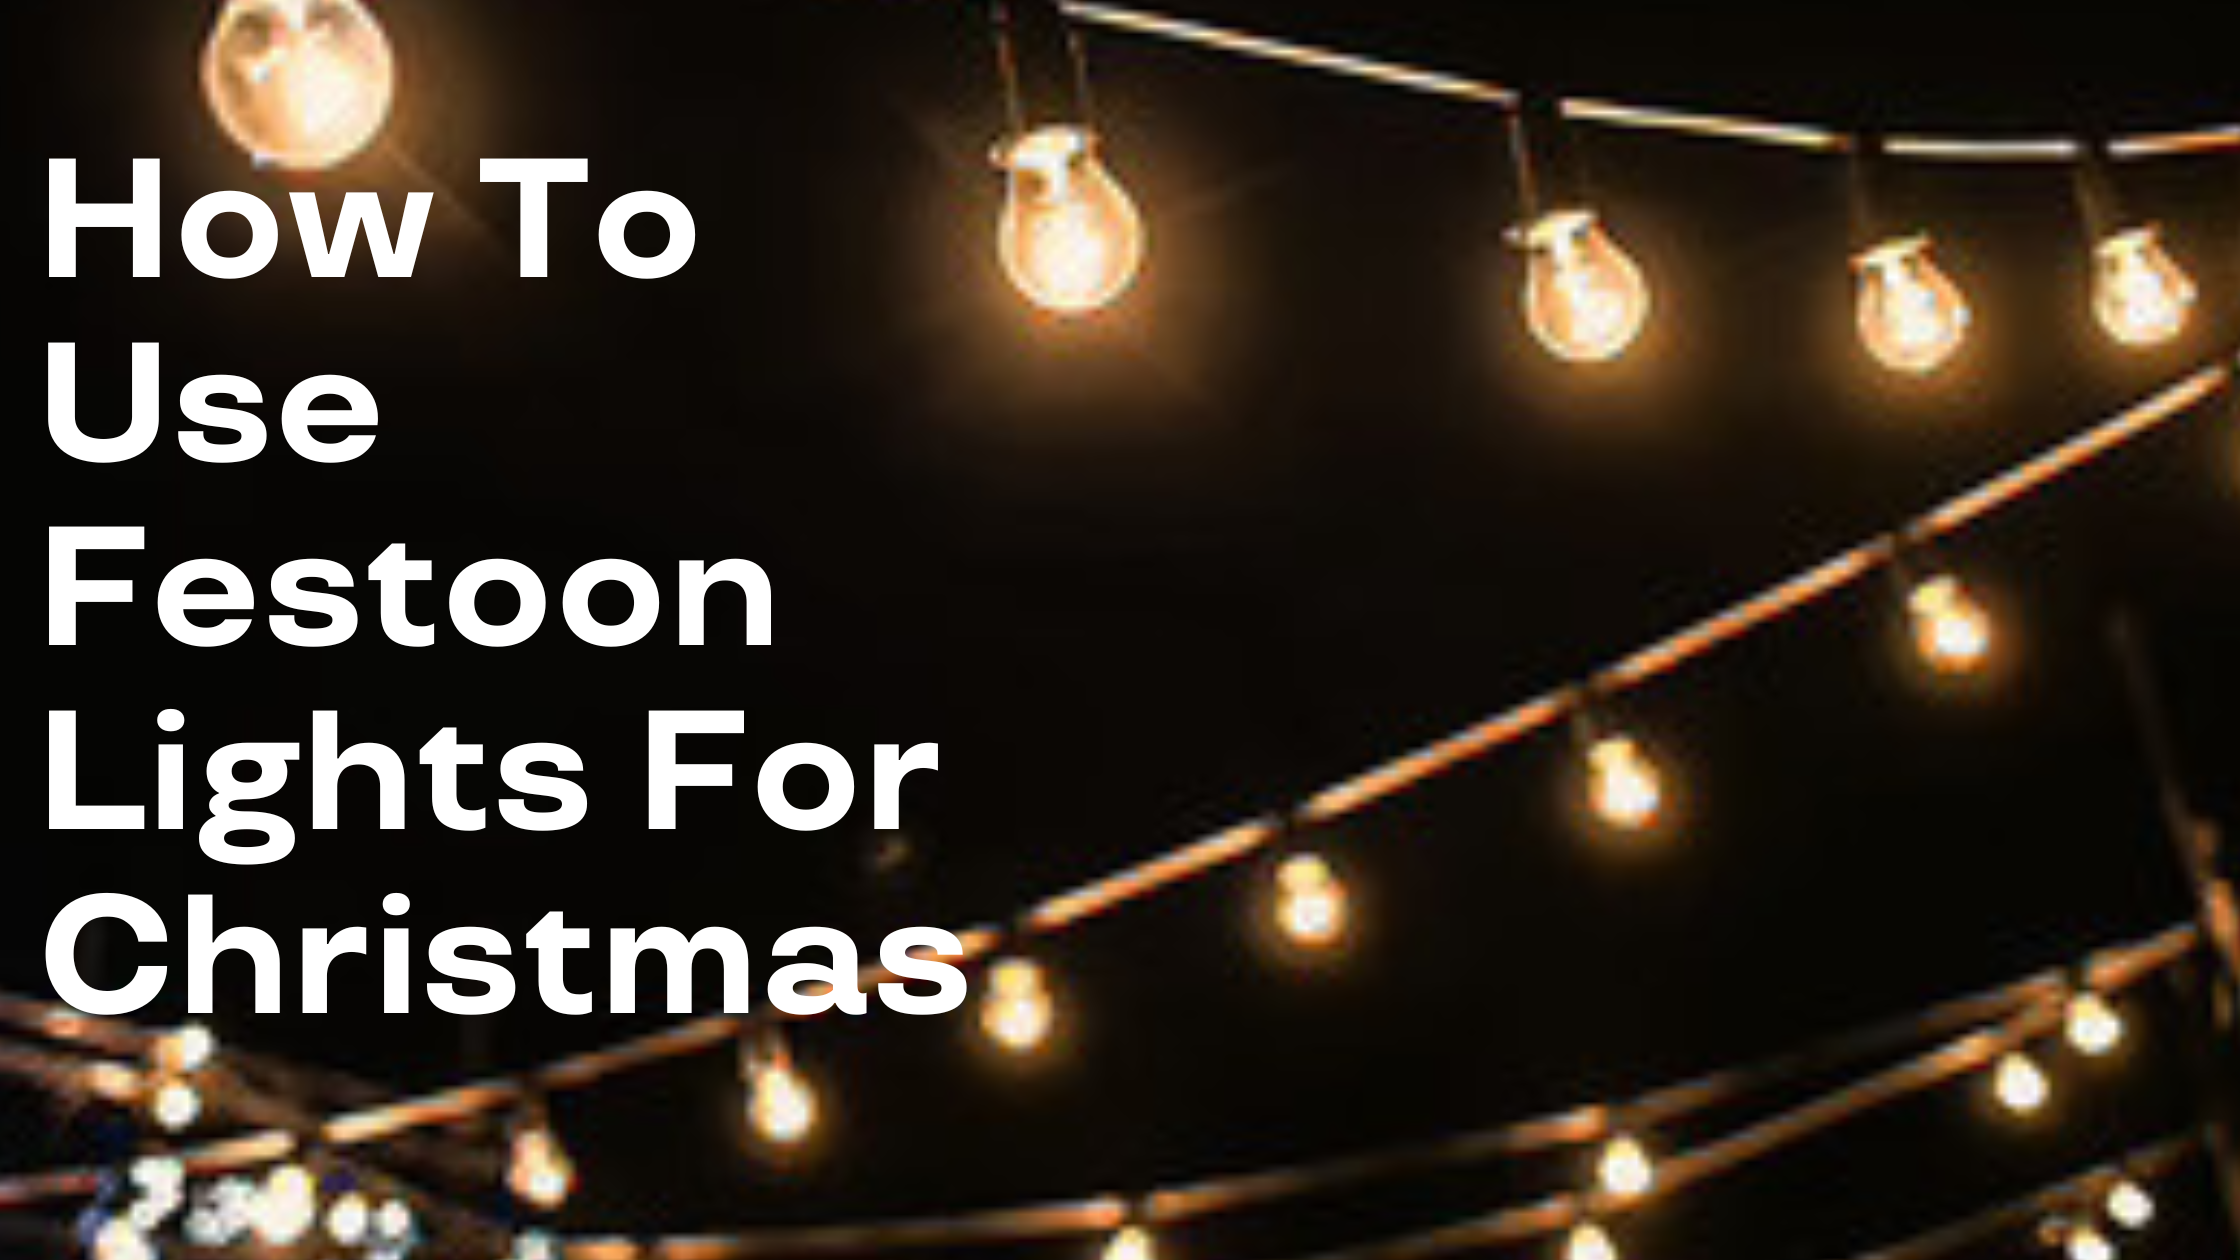 How To Use Festoon Lights For Christmas